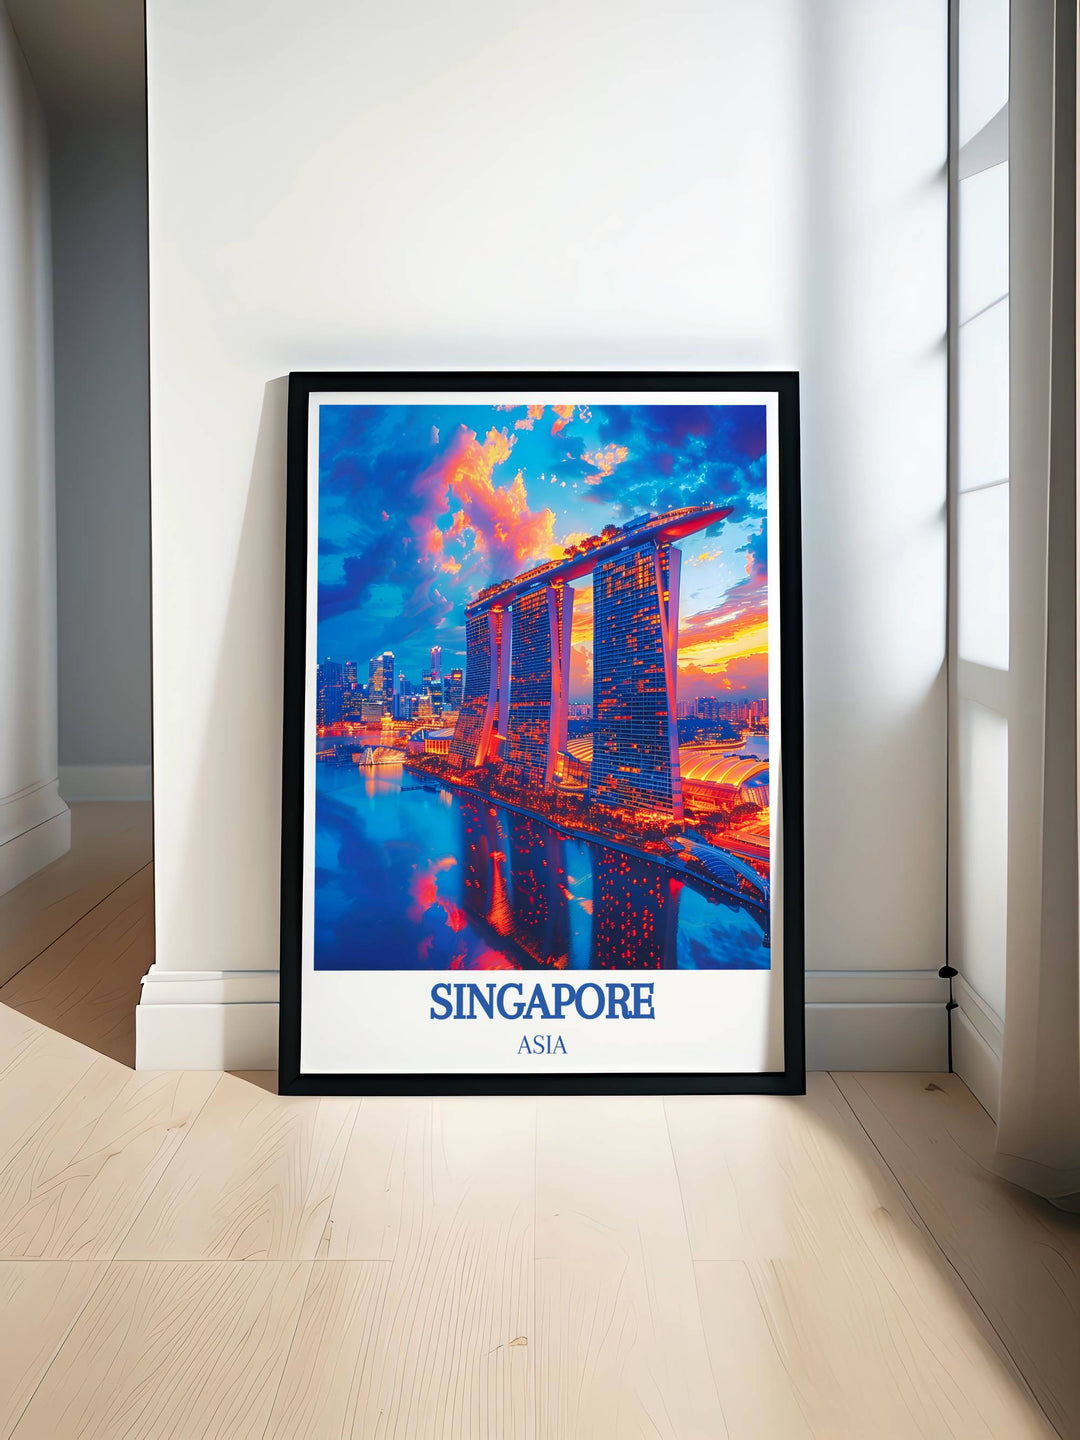 Marina Bay Sands Gallery Wall Art capturing the grandeur of Singapores iconic landmark, perfect for adding elegance to your home decor with detailed prints.